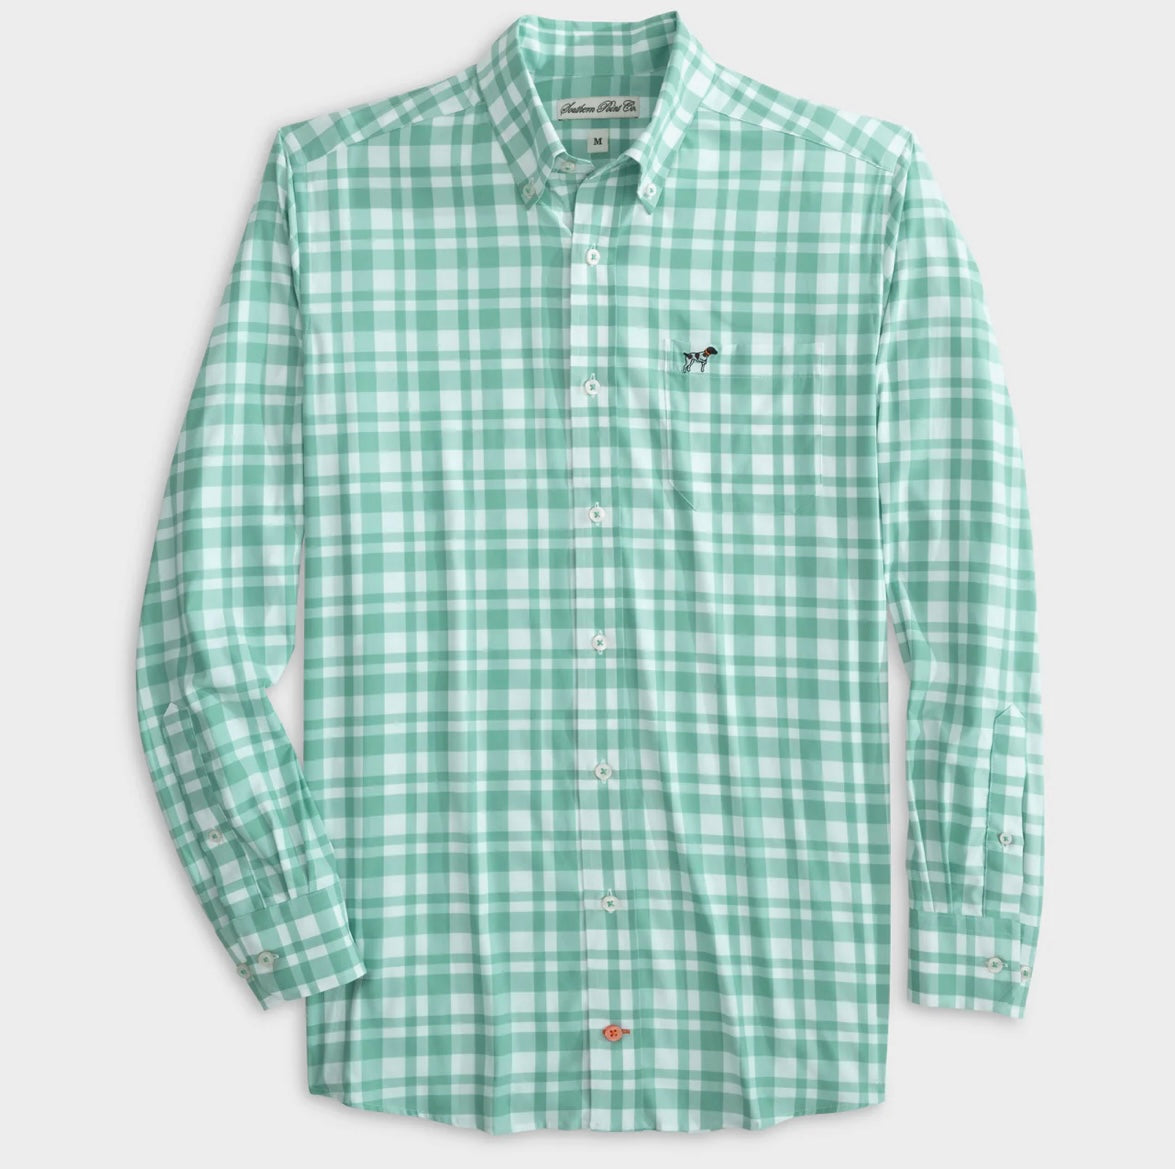 Hadley Performance Button Down in Bermuda Plaid by Southern Point Co.